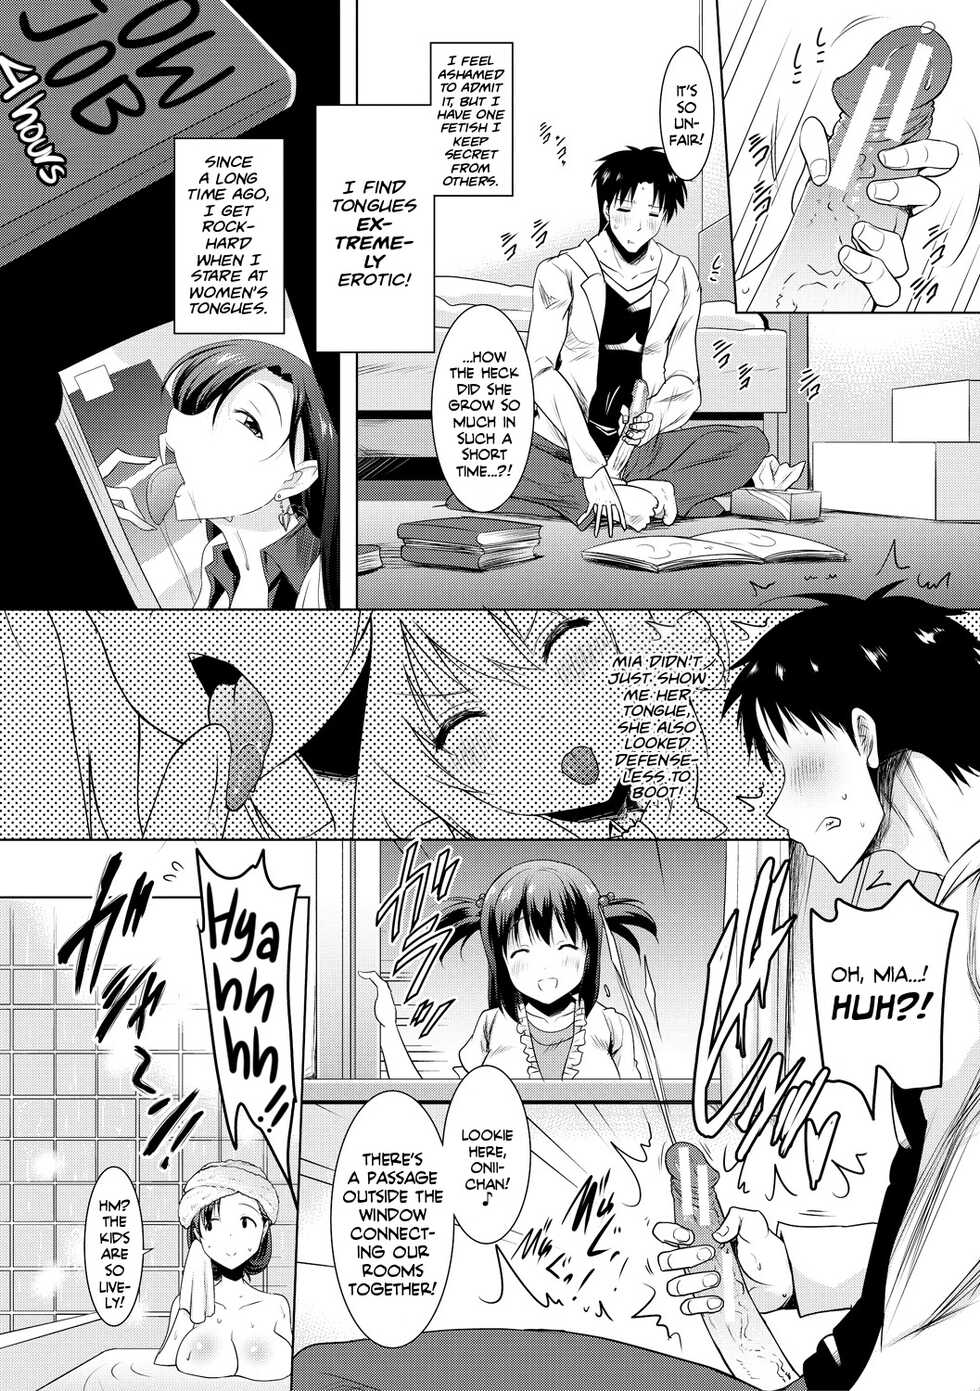 [Pony-R] I Can't Live Without My Little Sister's Tongue Chapter 01-02 + Secret Baby-making Sex with a Big-titted Mother and Daughter! (Kyonyuu Oyako no Shita to Shikyuu ni Renzoku Shasei) [English] [Team Rabu2] [Digital] - Page 8